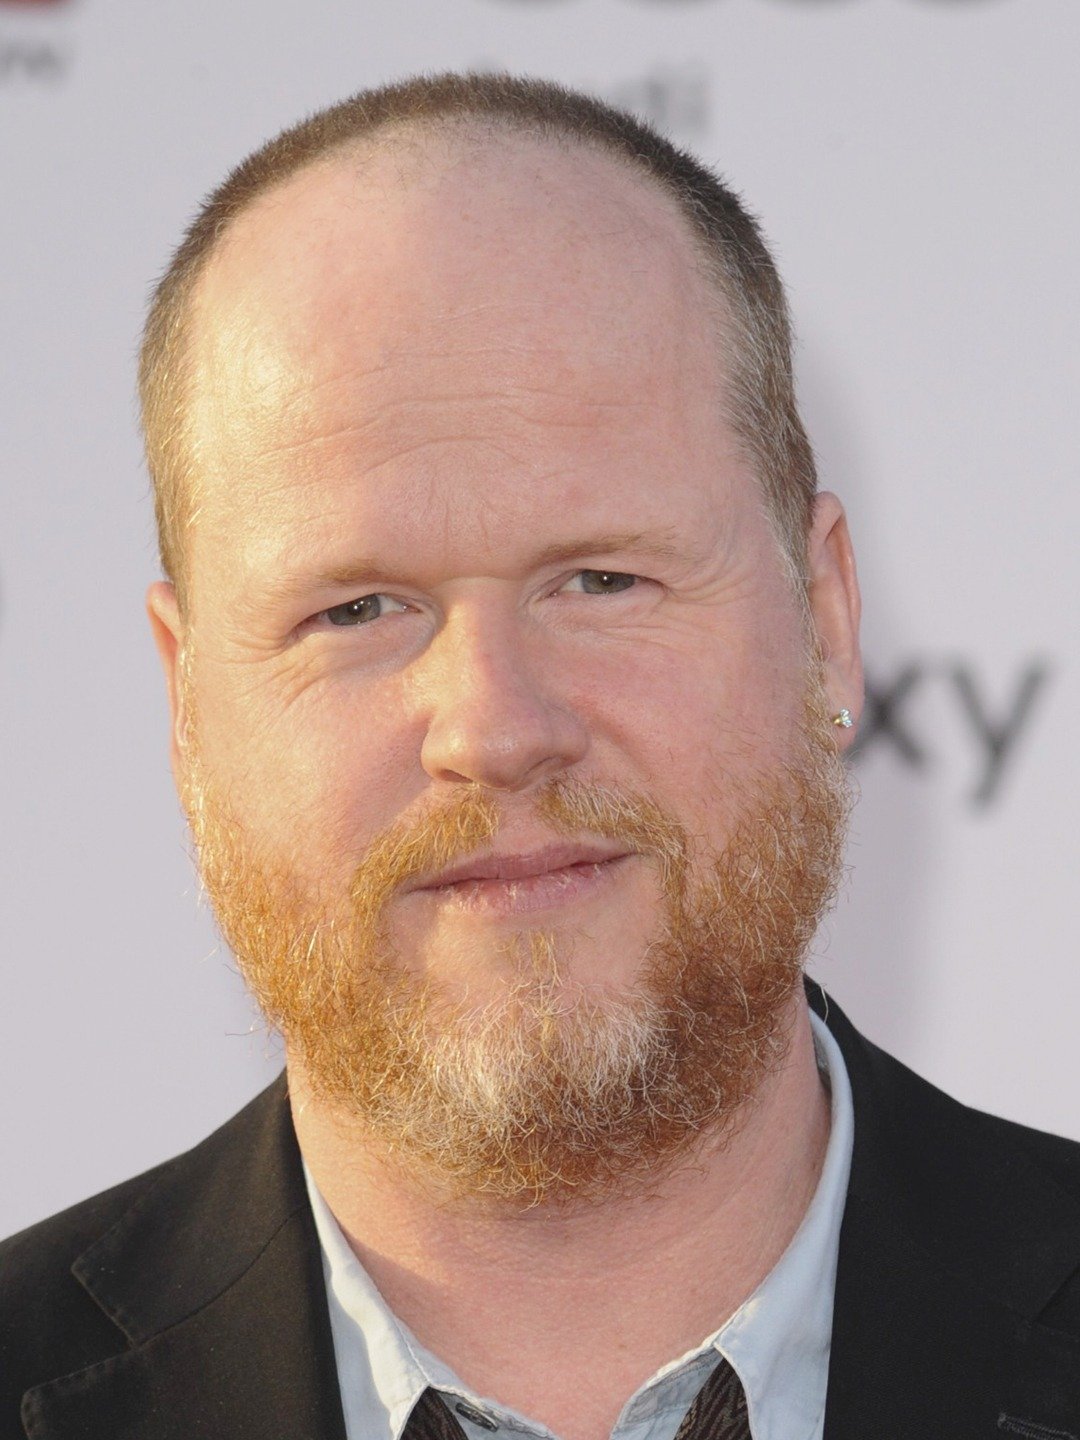 Image result for joss whedon"